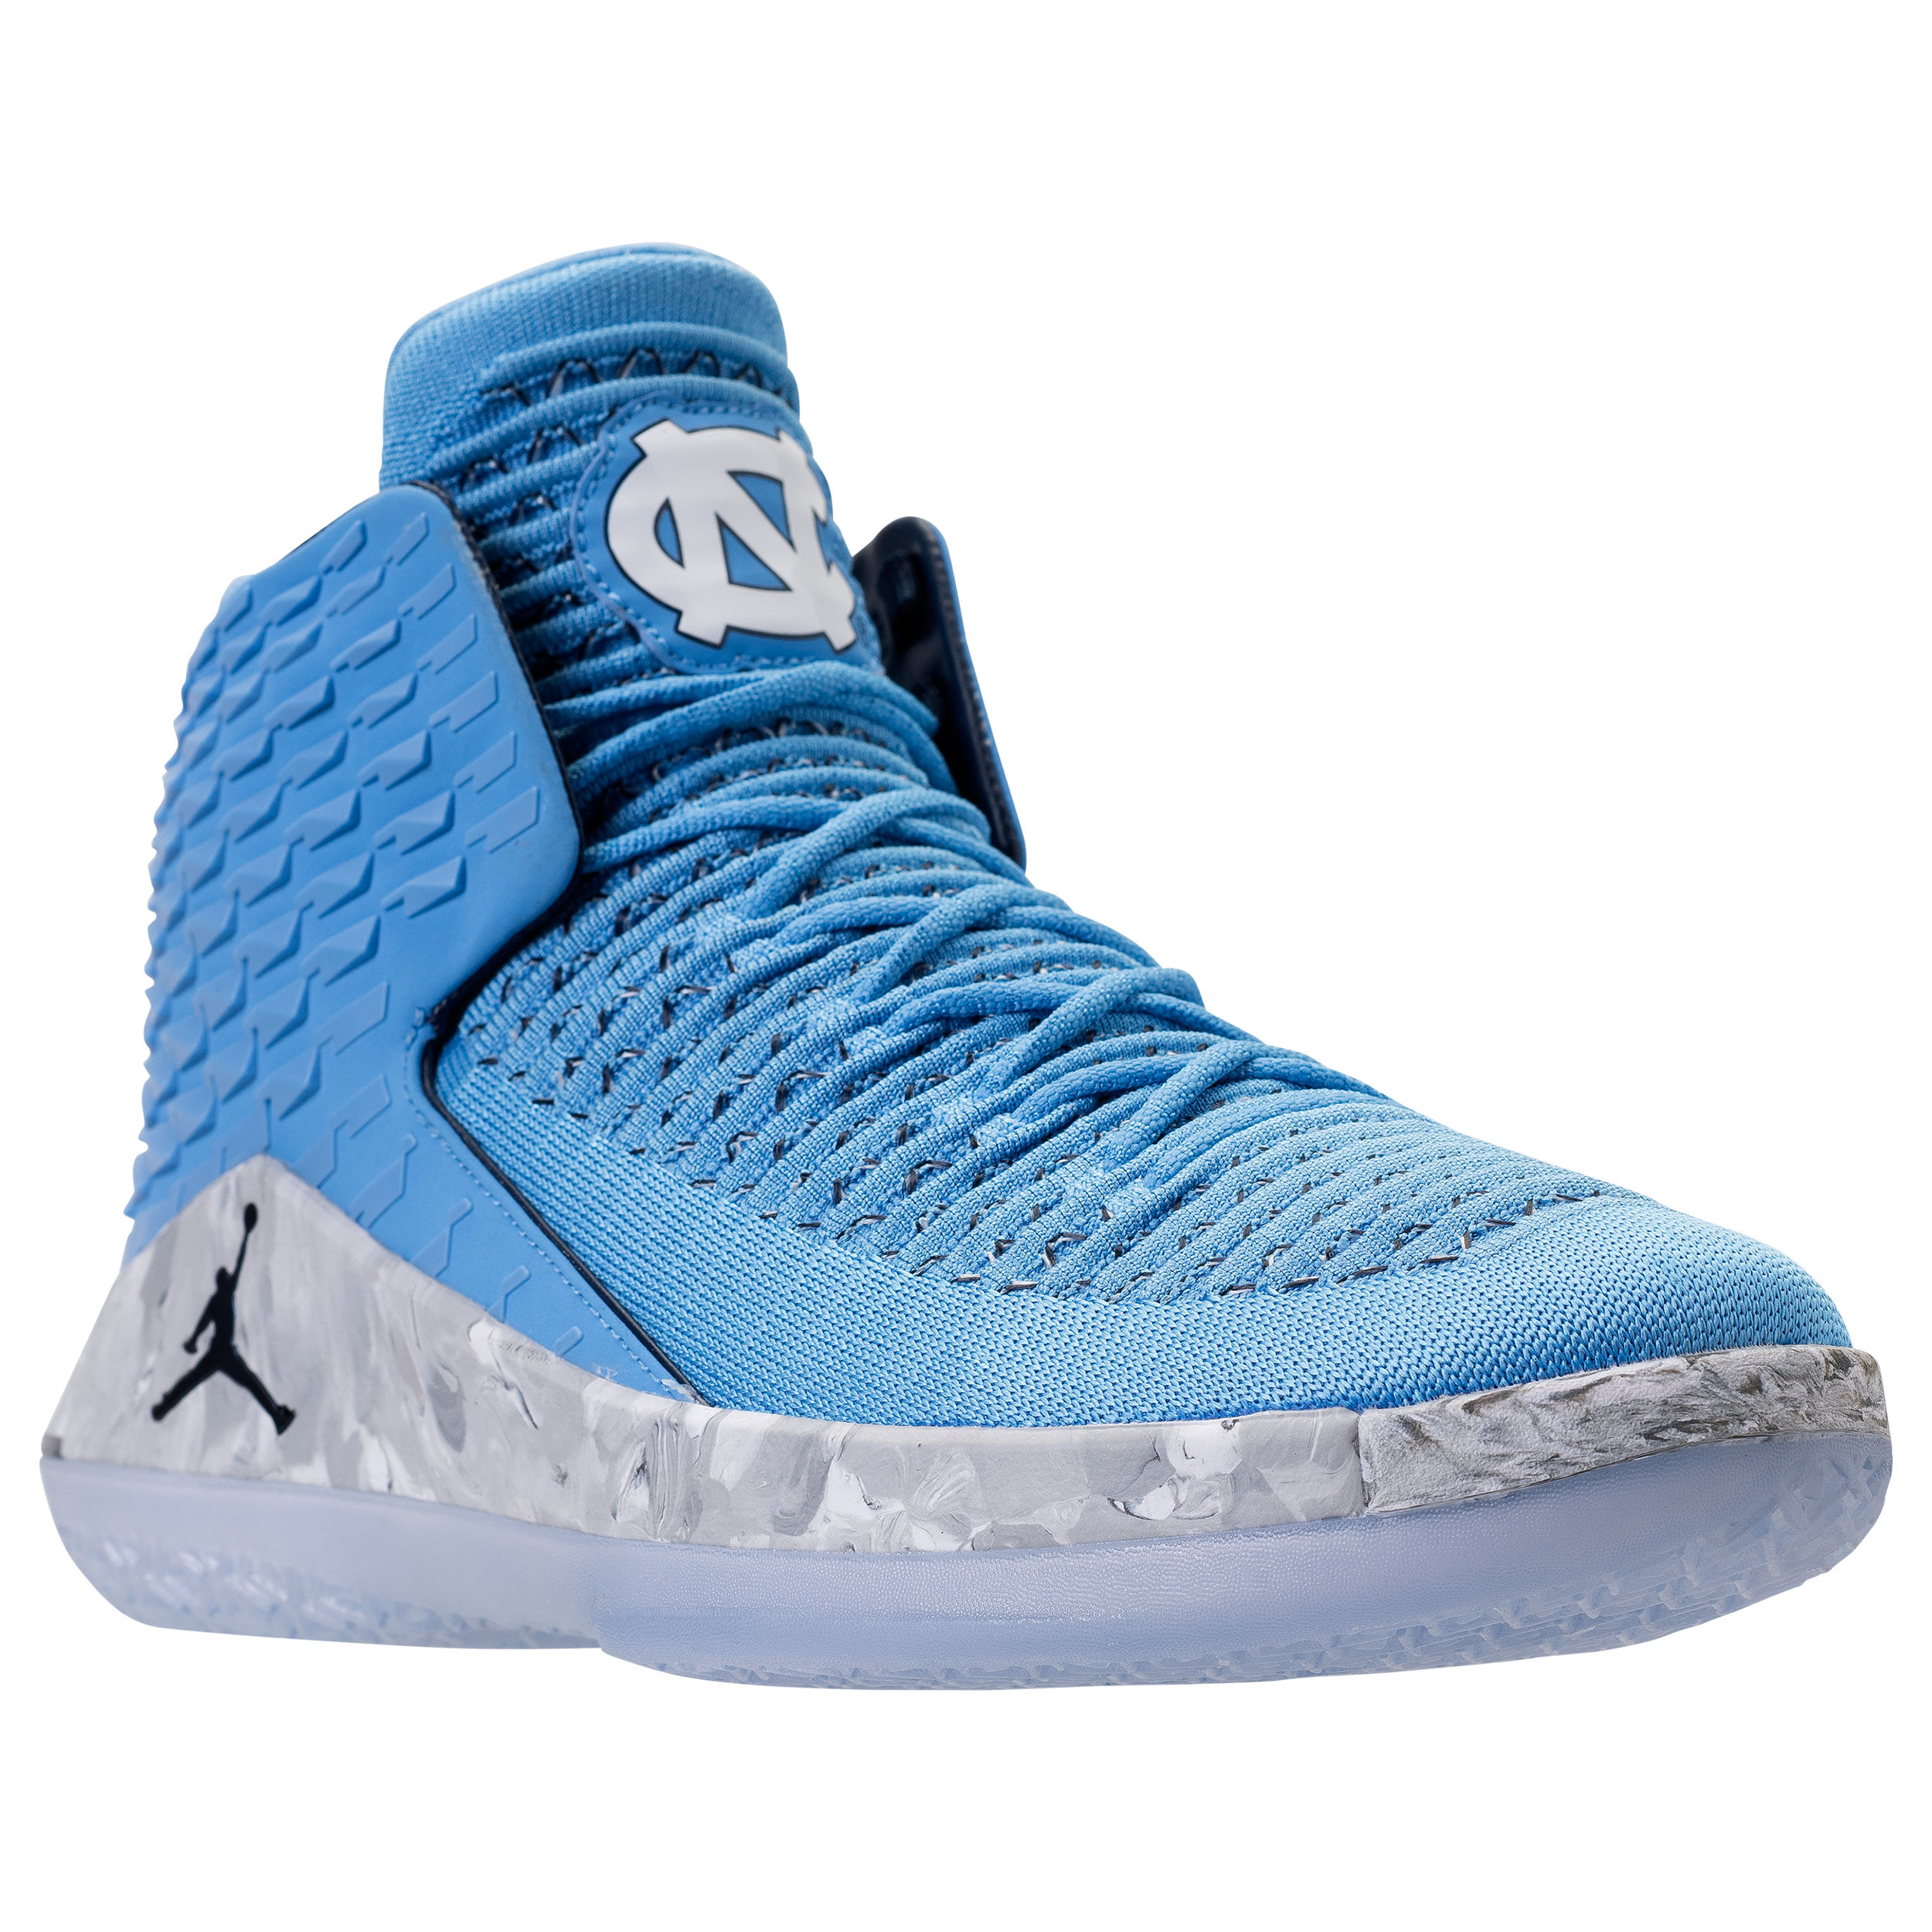 More Exclusive Air Jordan 32 PEs for UNC Basketball - WearTesters